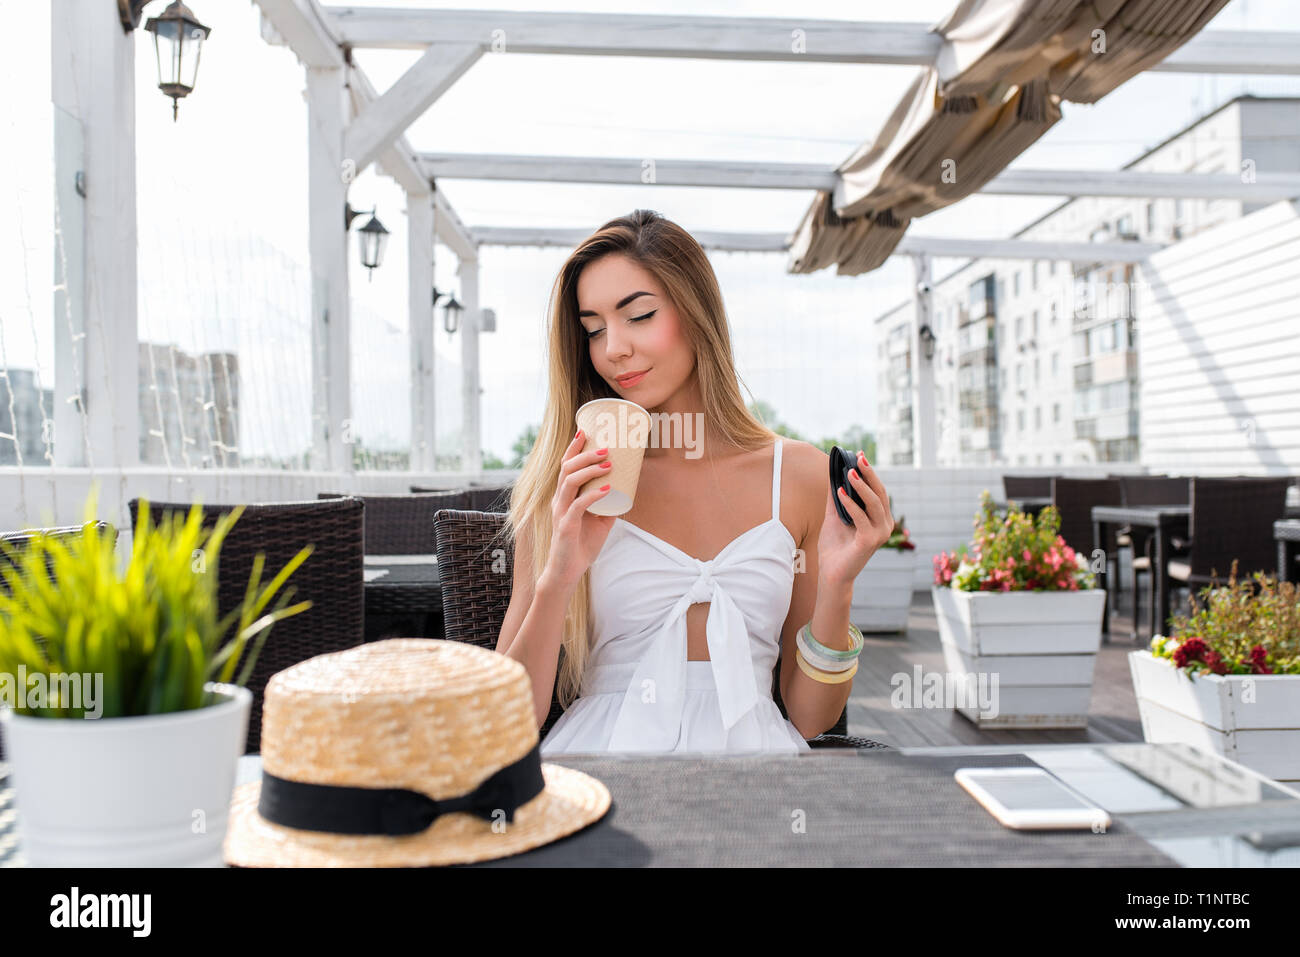 The girl in the cafe. Sniffs and enjoys coffee, inhales the aroma gets pleasure from the smell of tea. Relaxing summer restaurant on the veranda Stock Photo